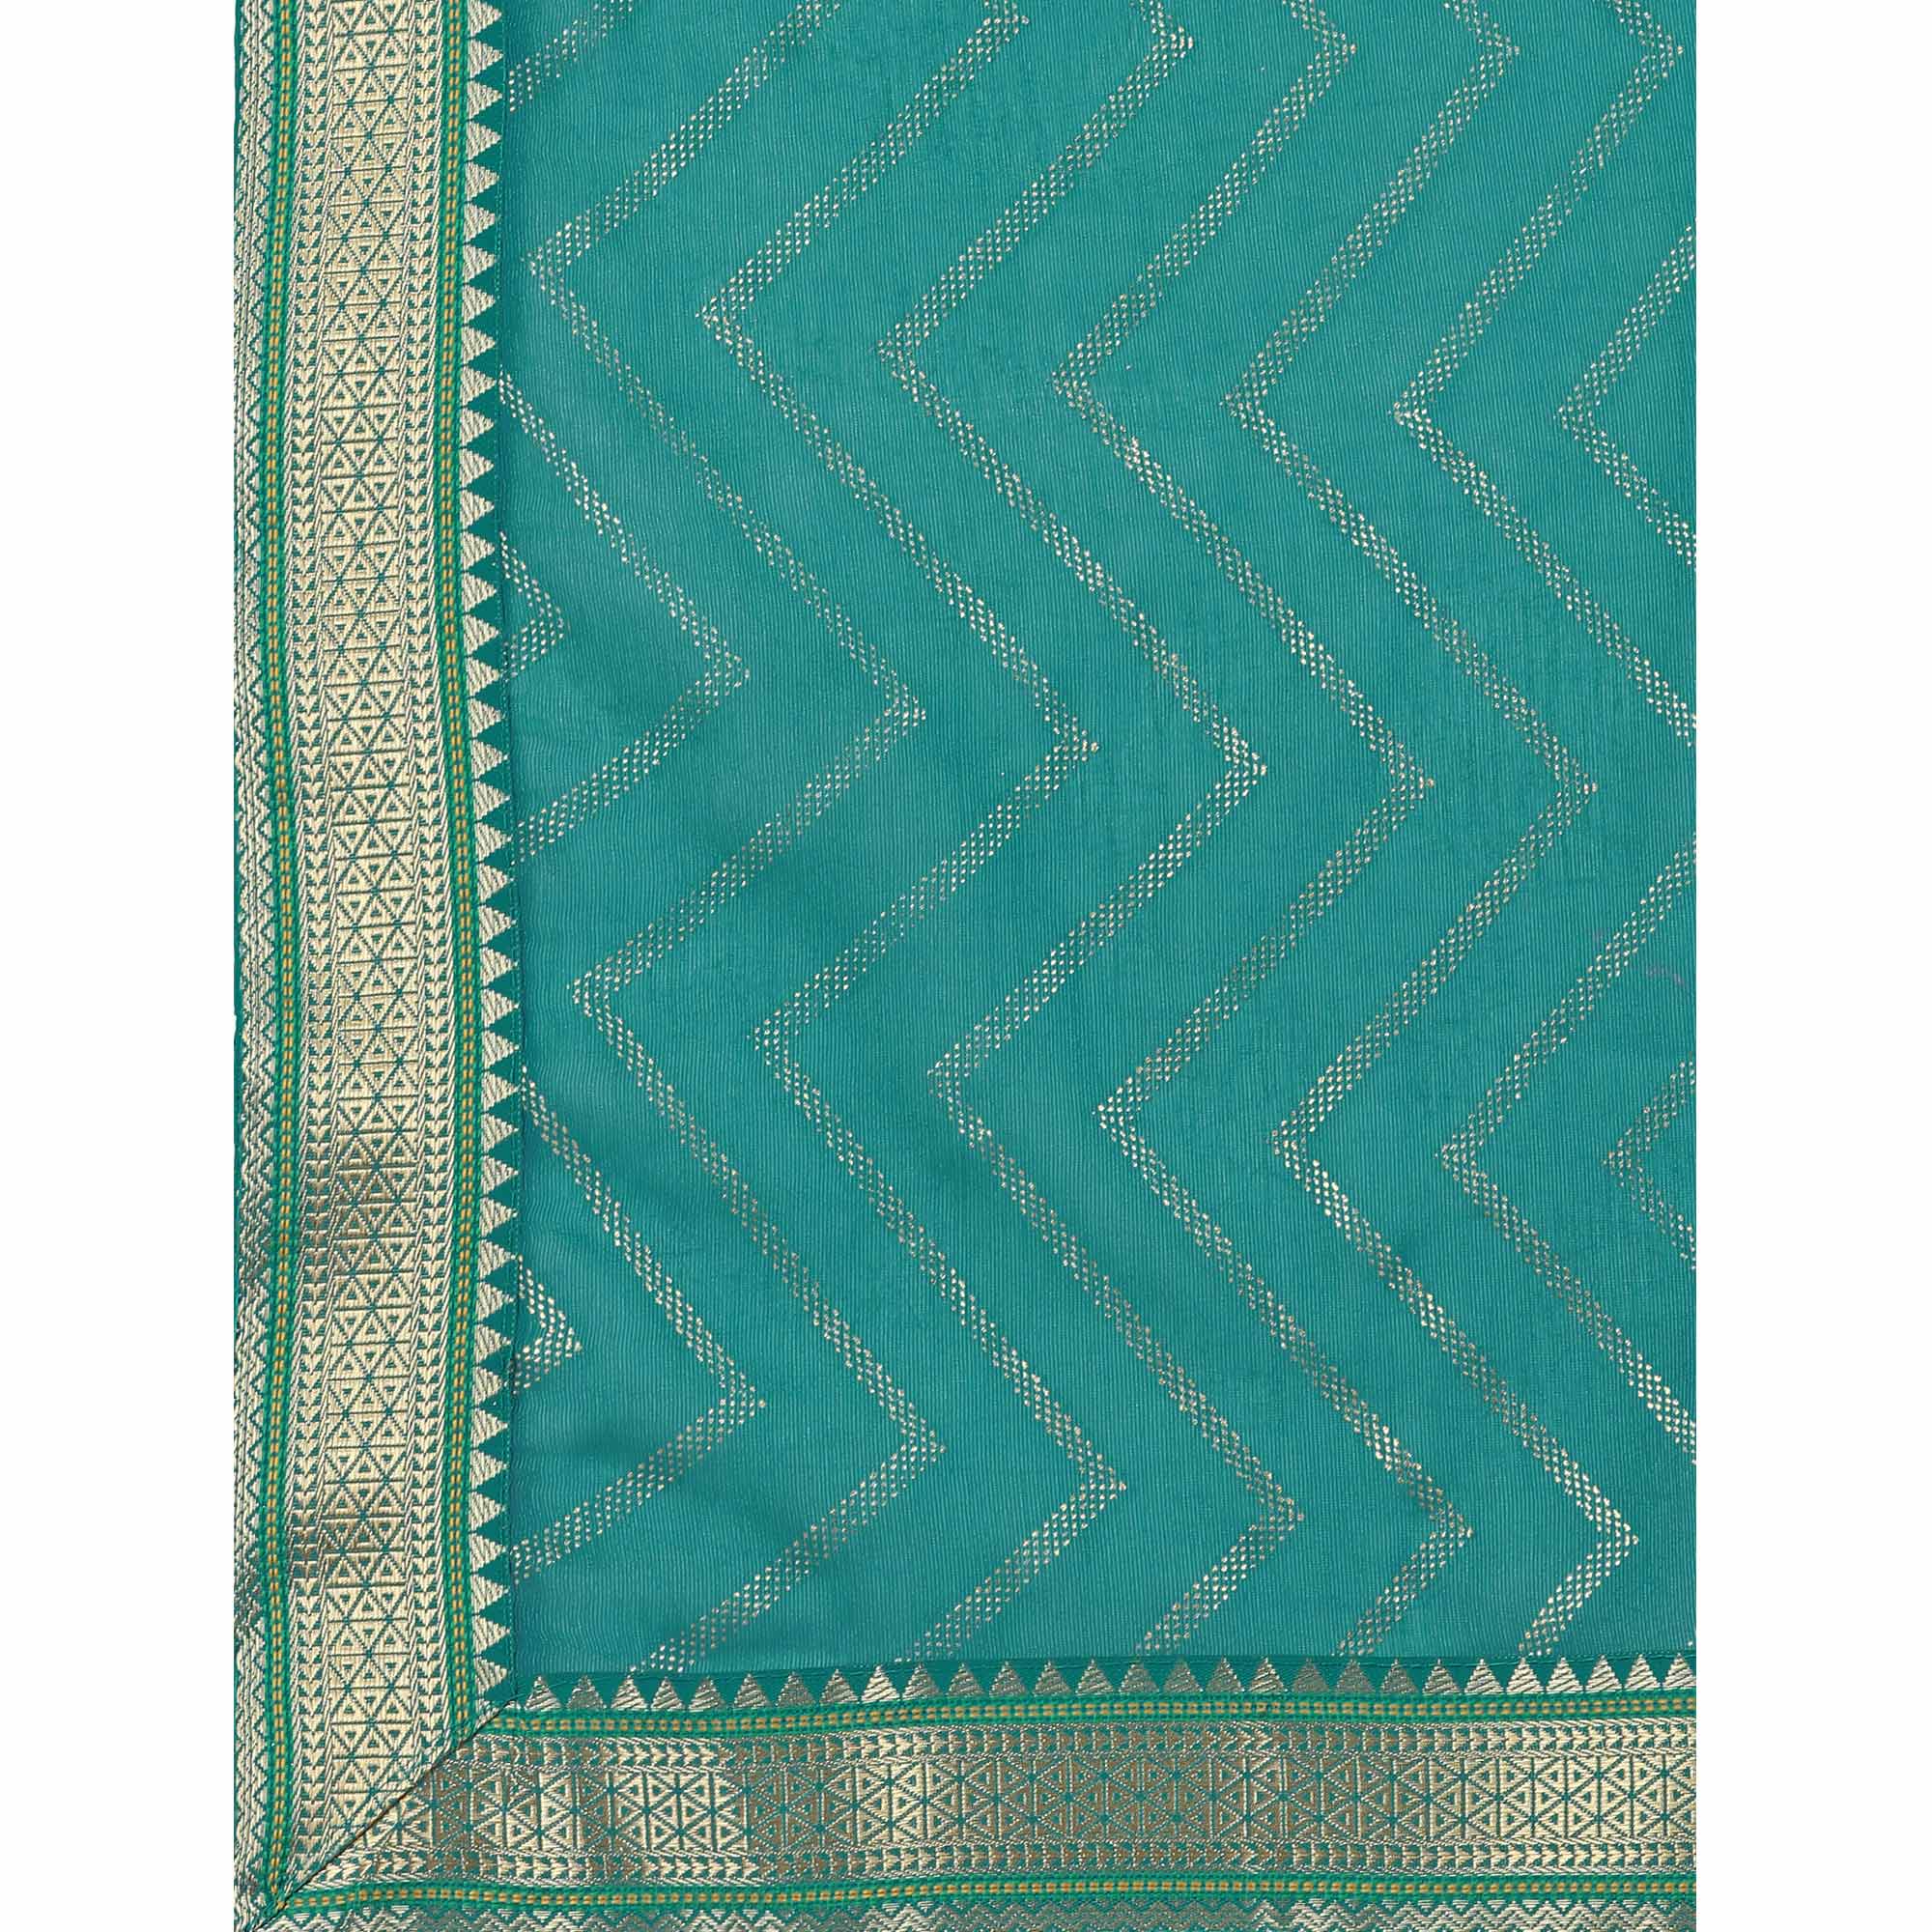 Teal Blue Foil Printed Chiffon Saree With Lace Border